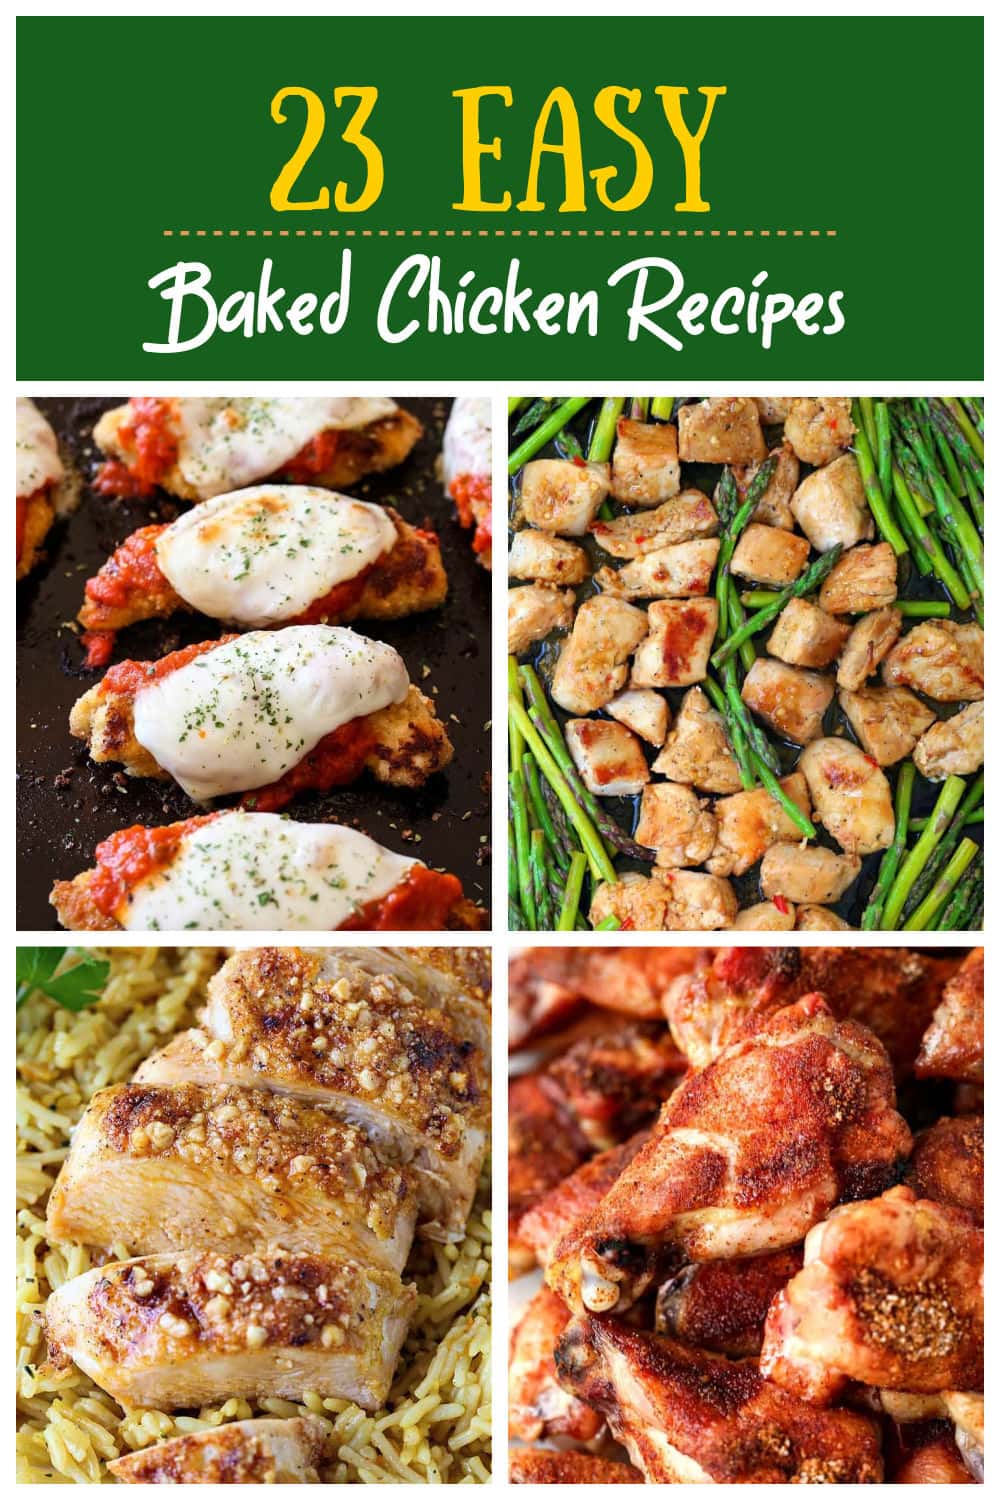 23 easy baked chicken recipes collage